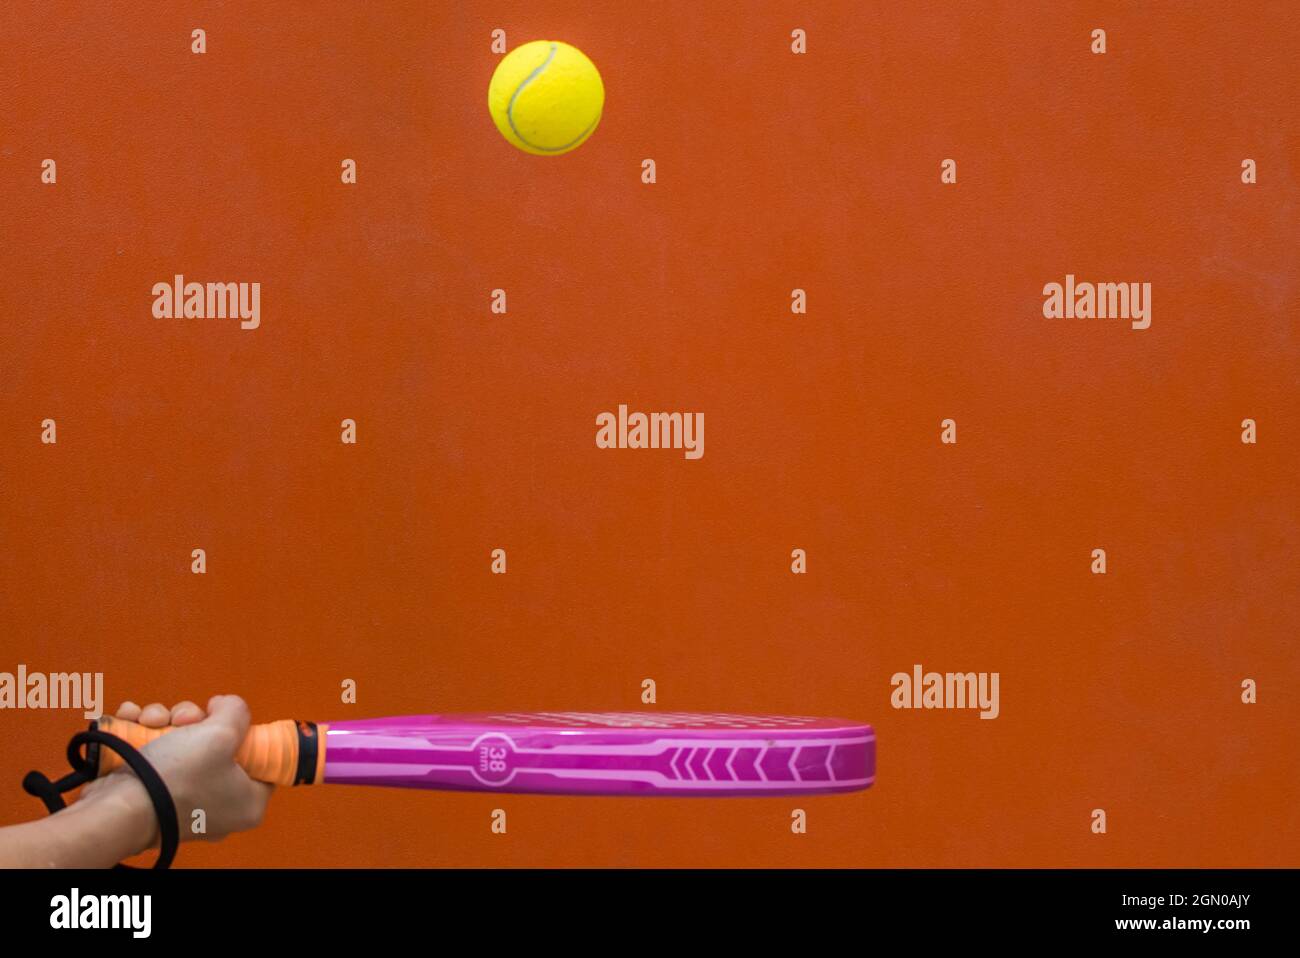 Hand Holding A Paddle Tennis Racket Hitting The Ball On An Orange Background.Sports Stock Photo